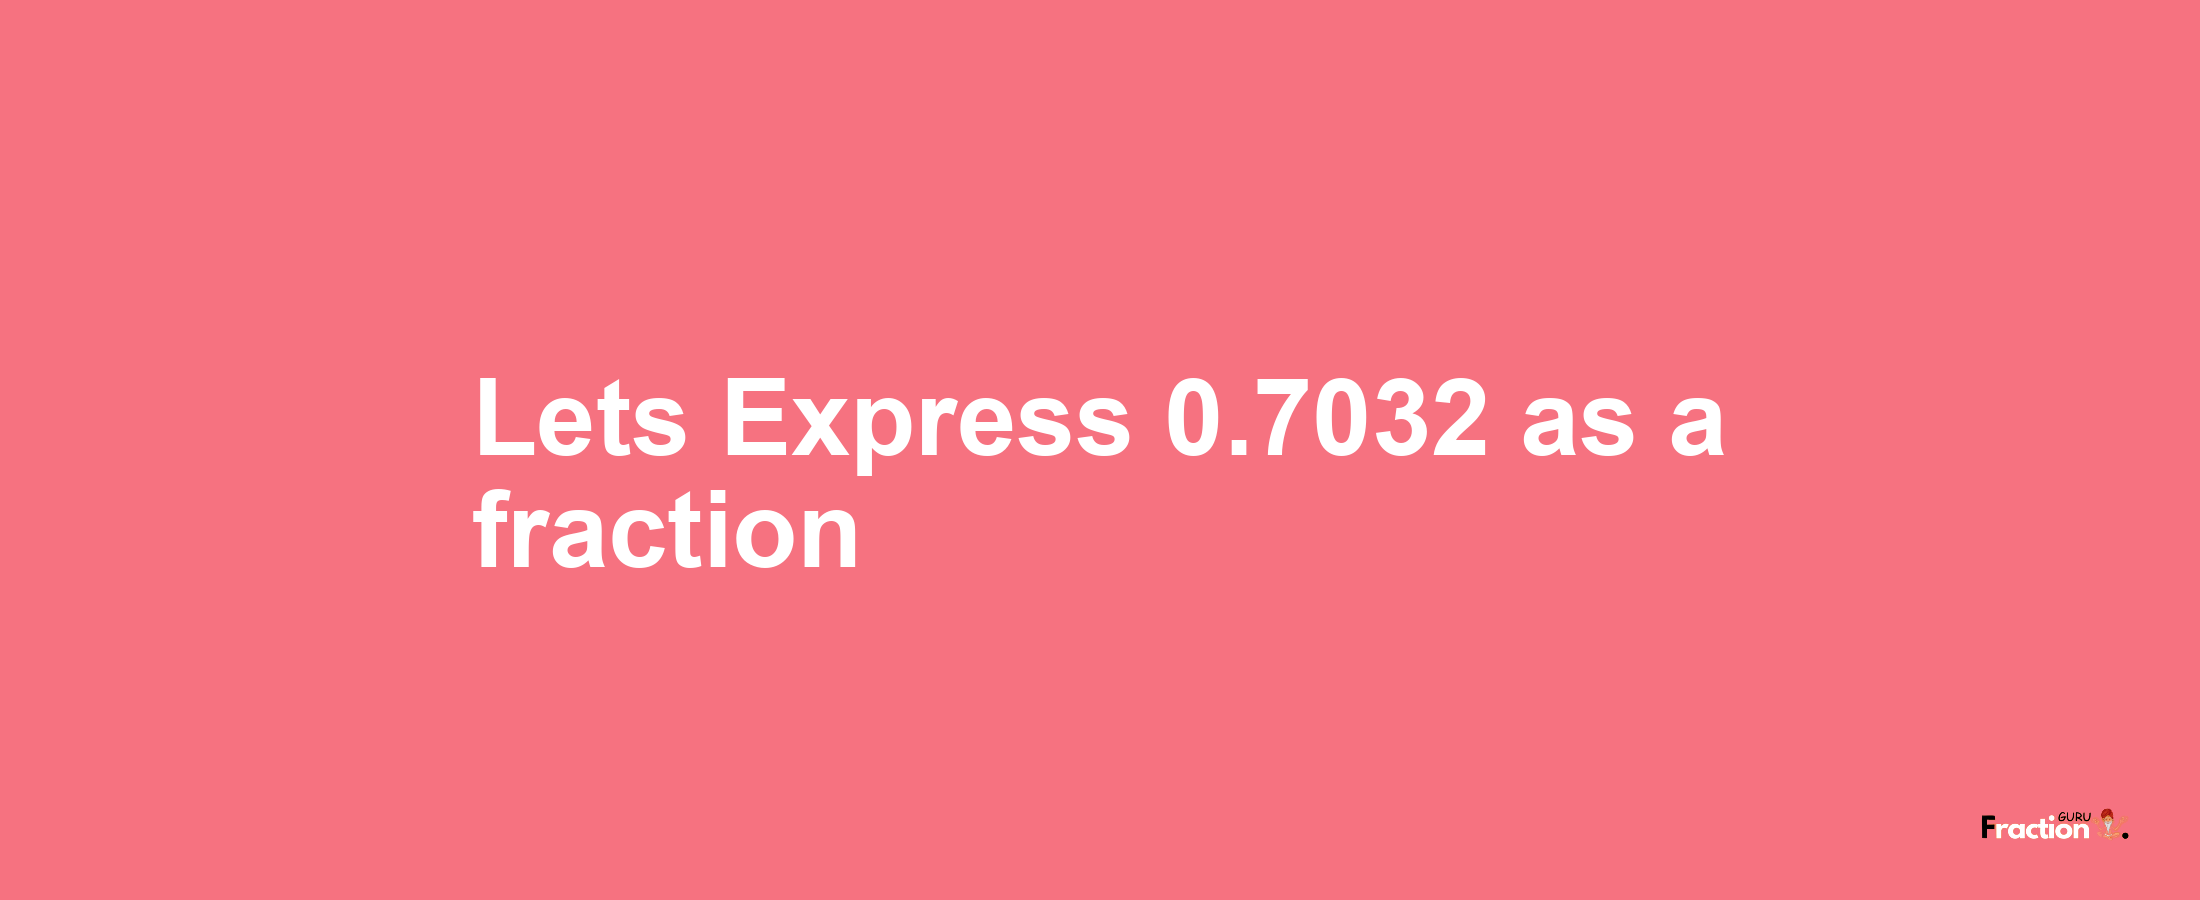 Lets Express 0.7032 as afraction